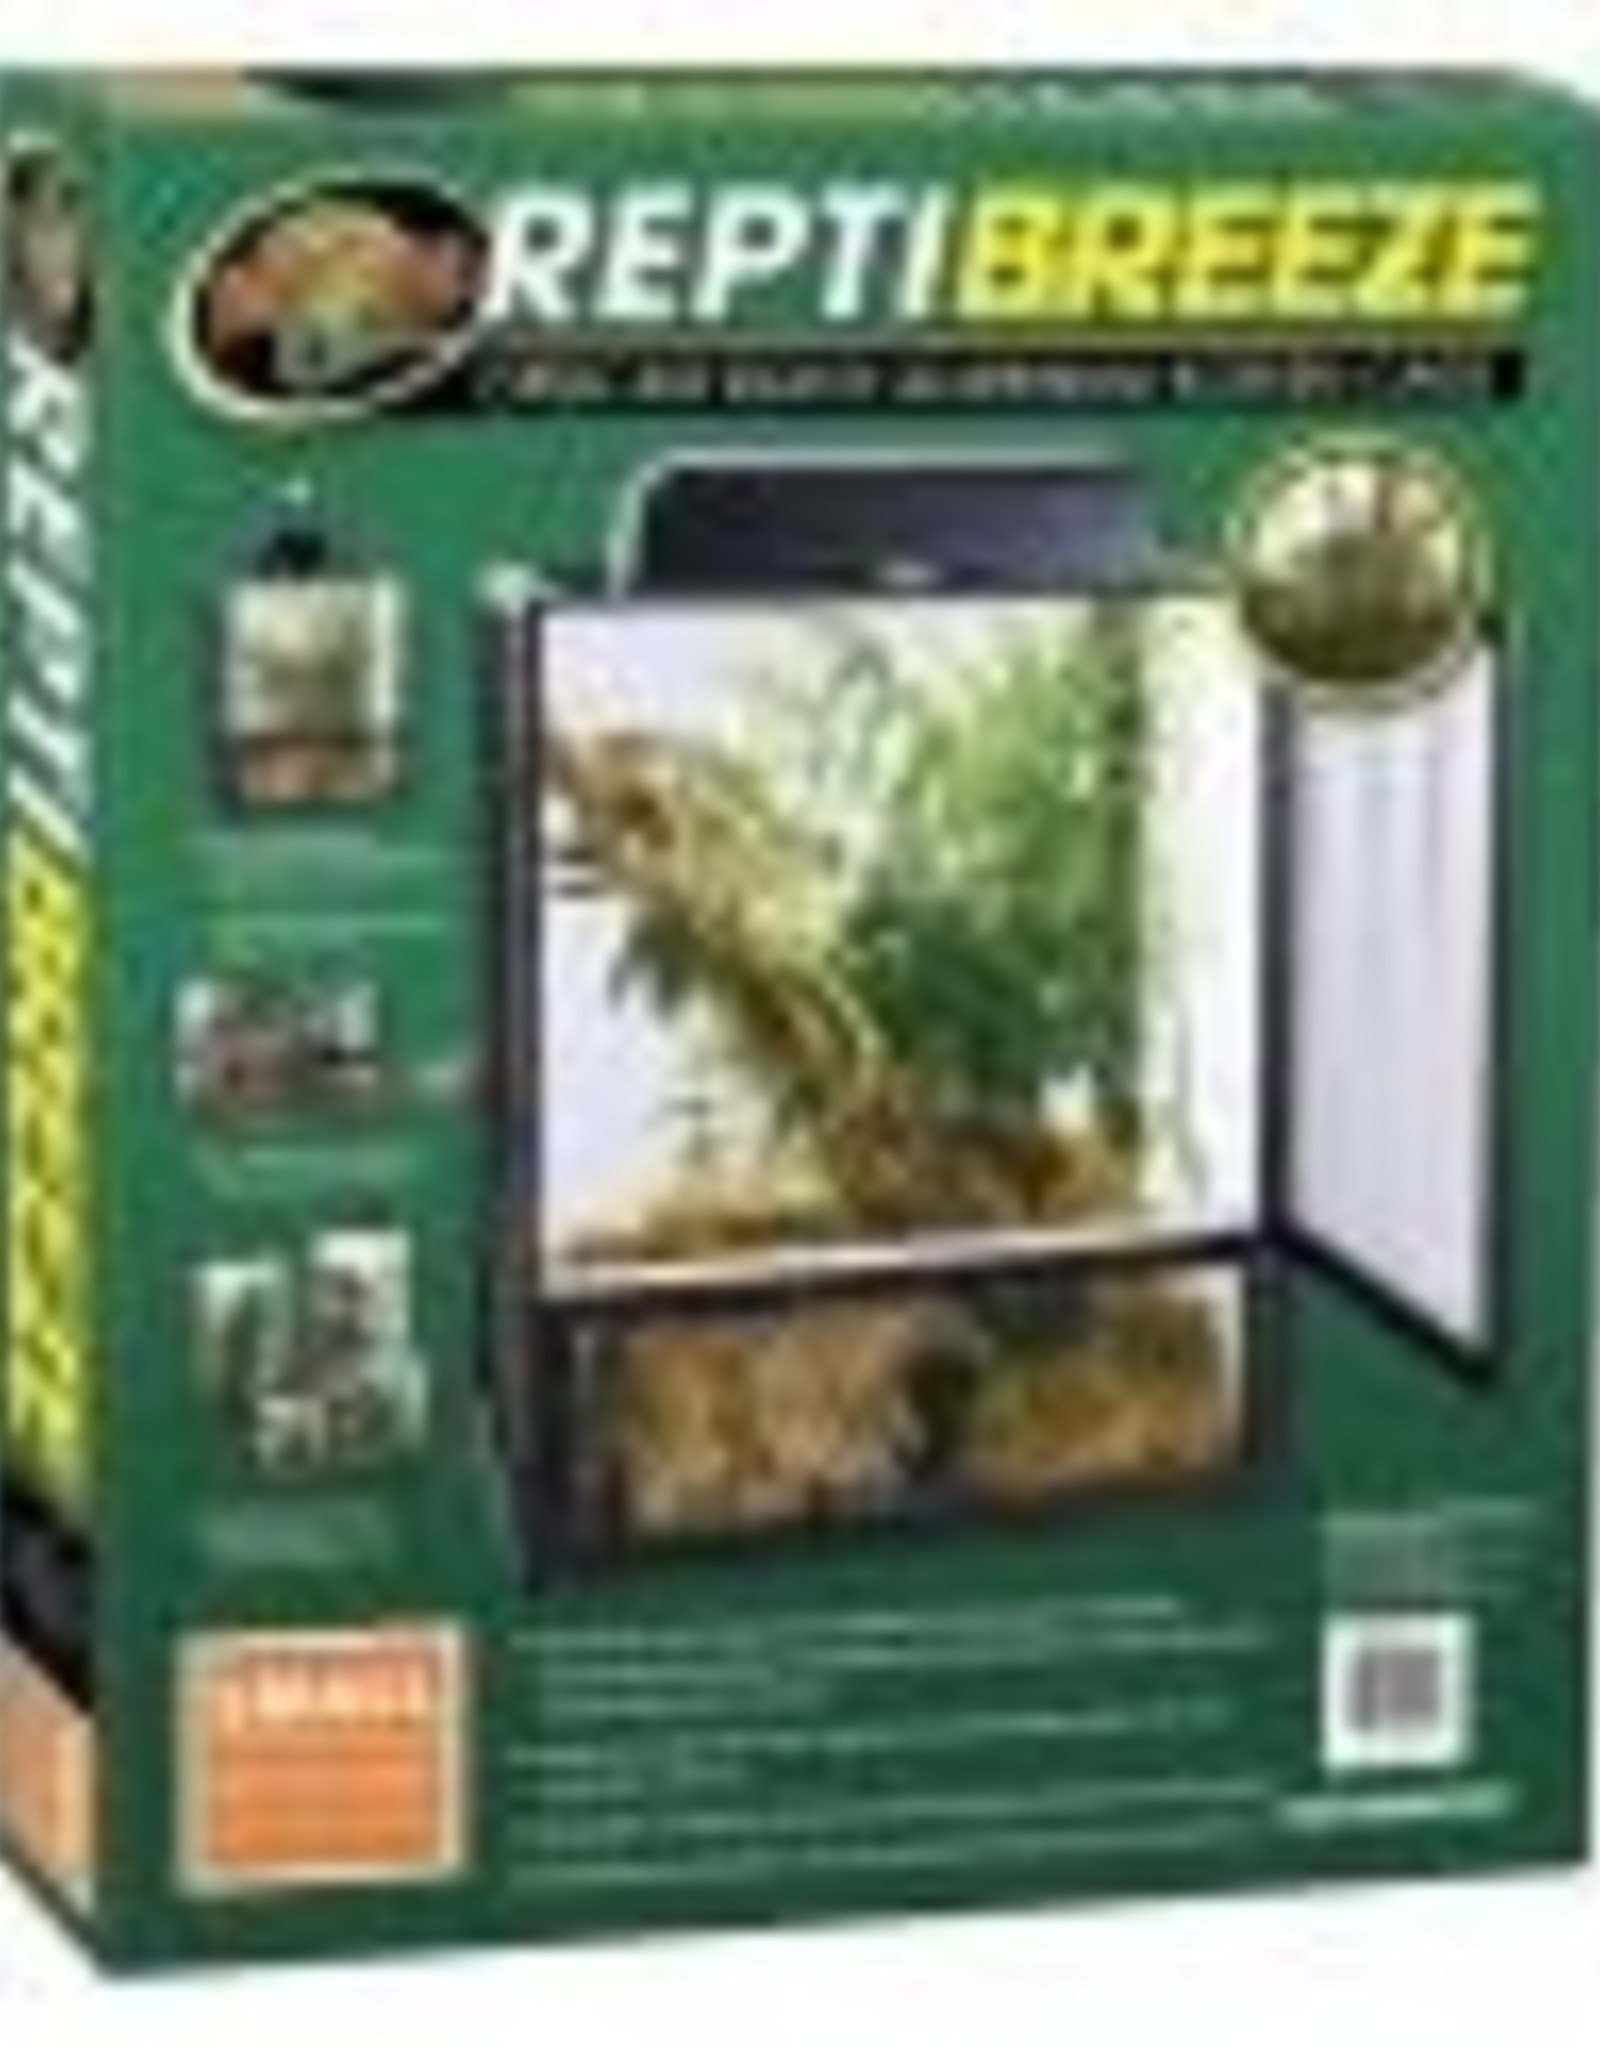 ZOO MED LABORATORIES, INC. ZOO MED- NT-10 REPTIBREEZE SCREEN CAGE- SMALL- 16X16X20